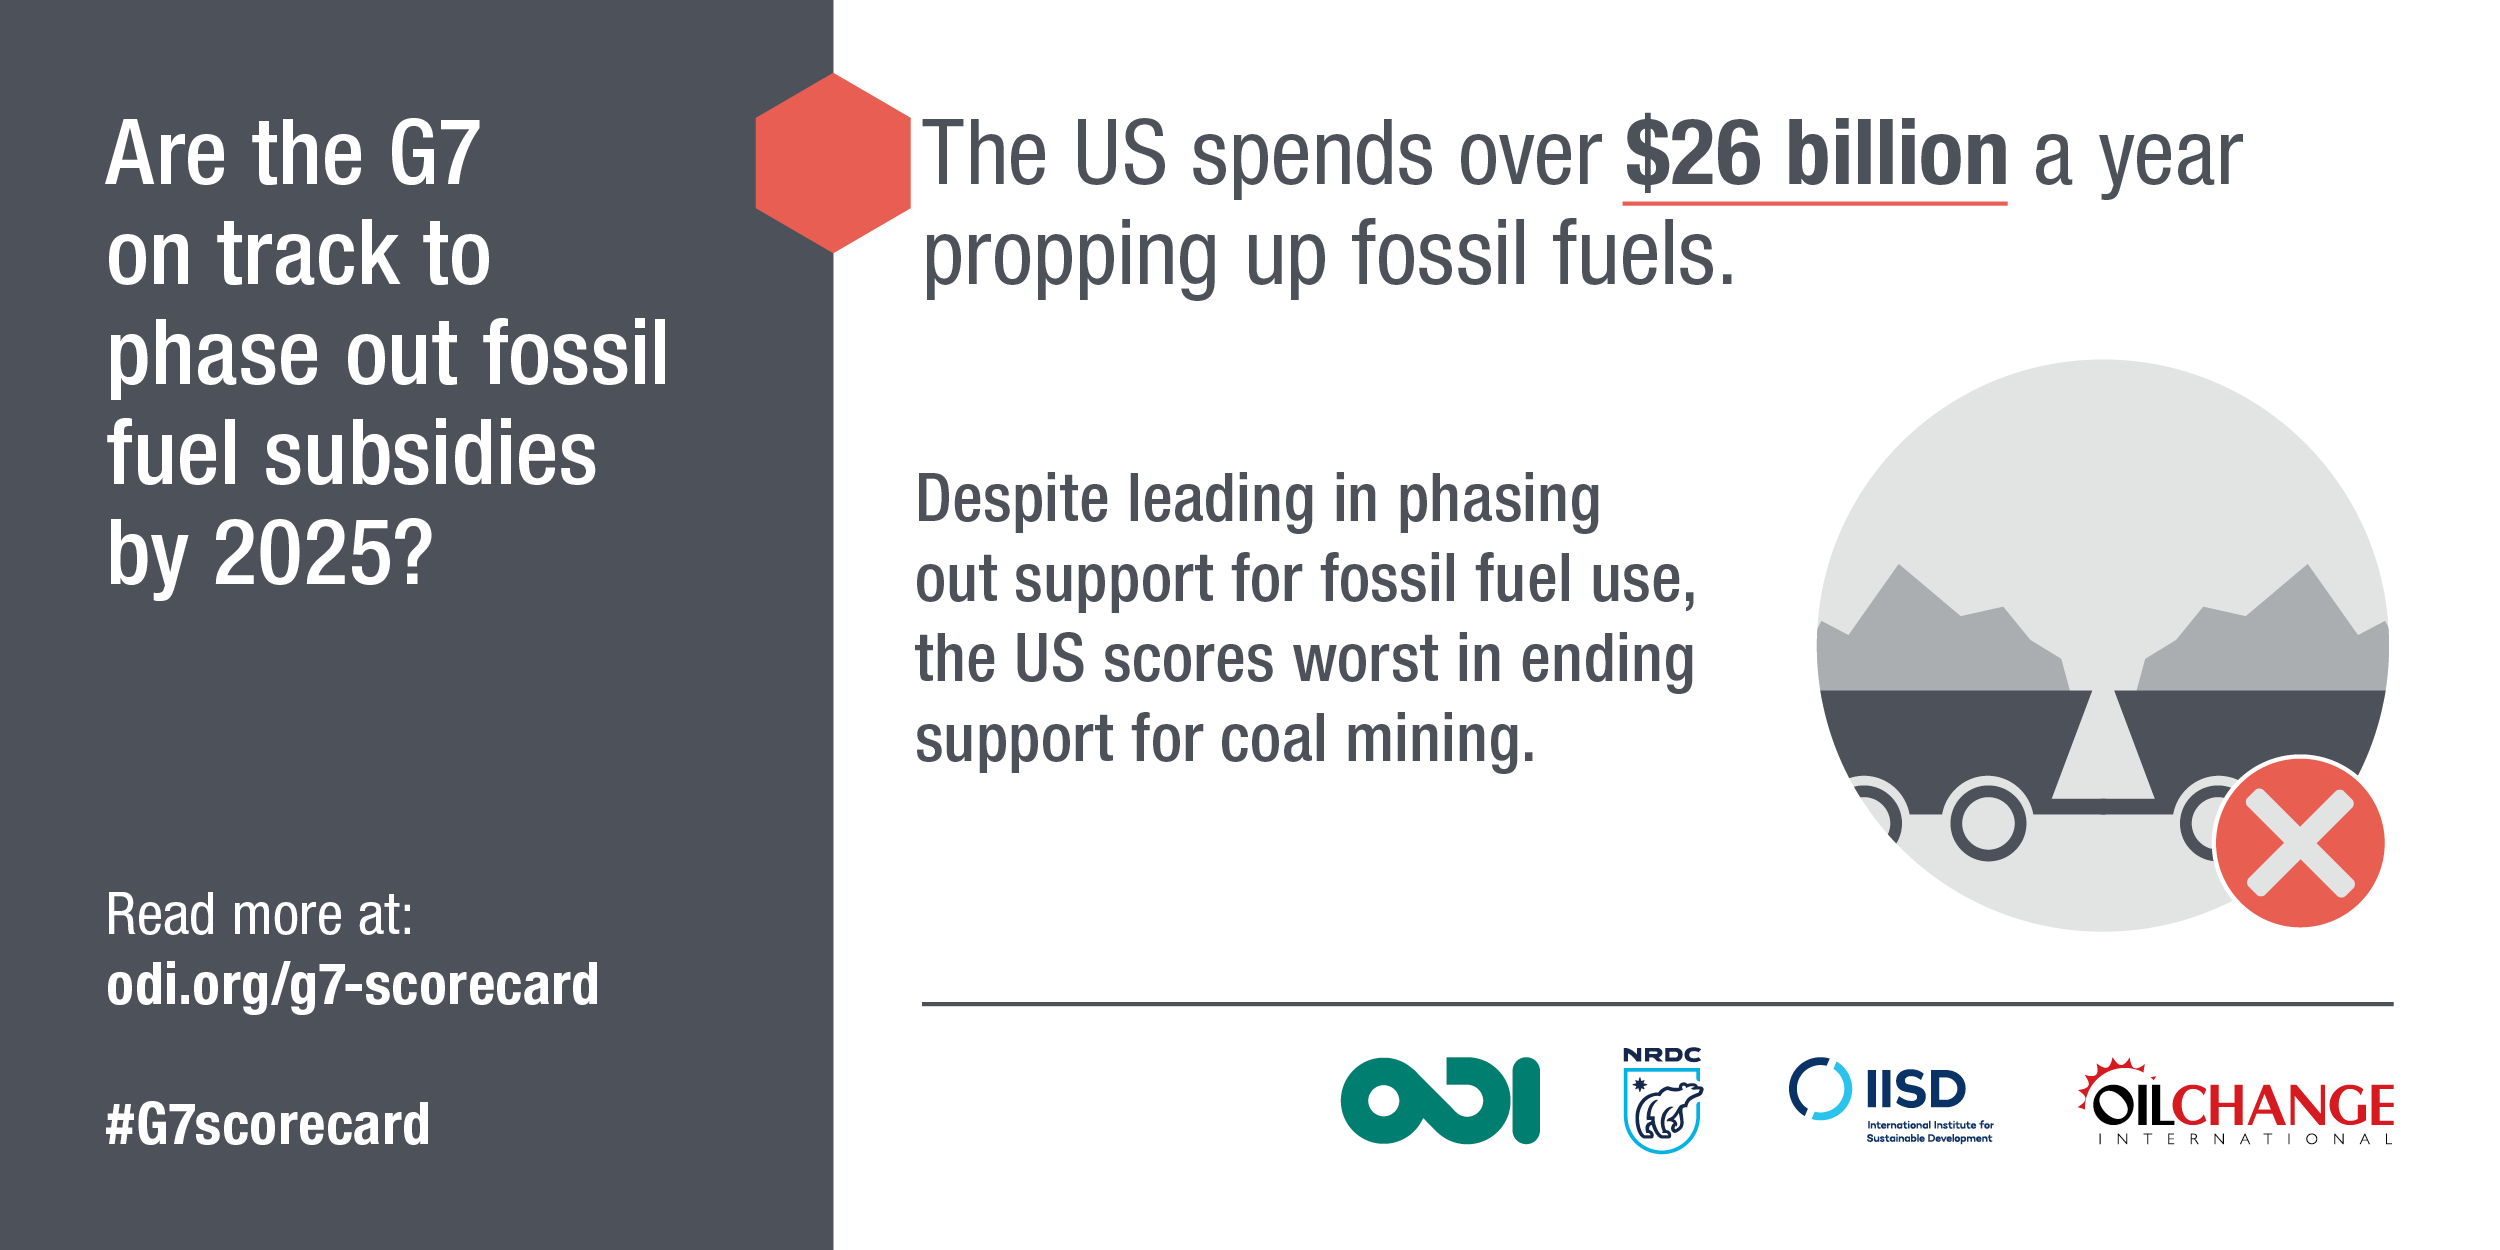 The US spends over $26 billion a year propping up fossil fuels. Image: ODI